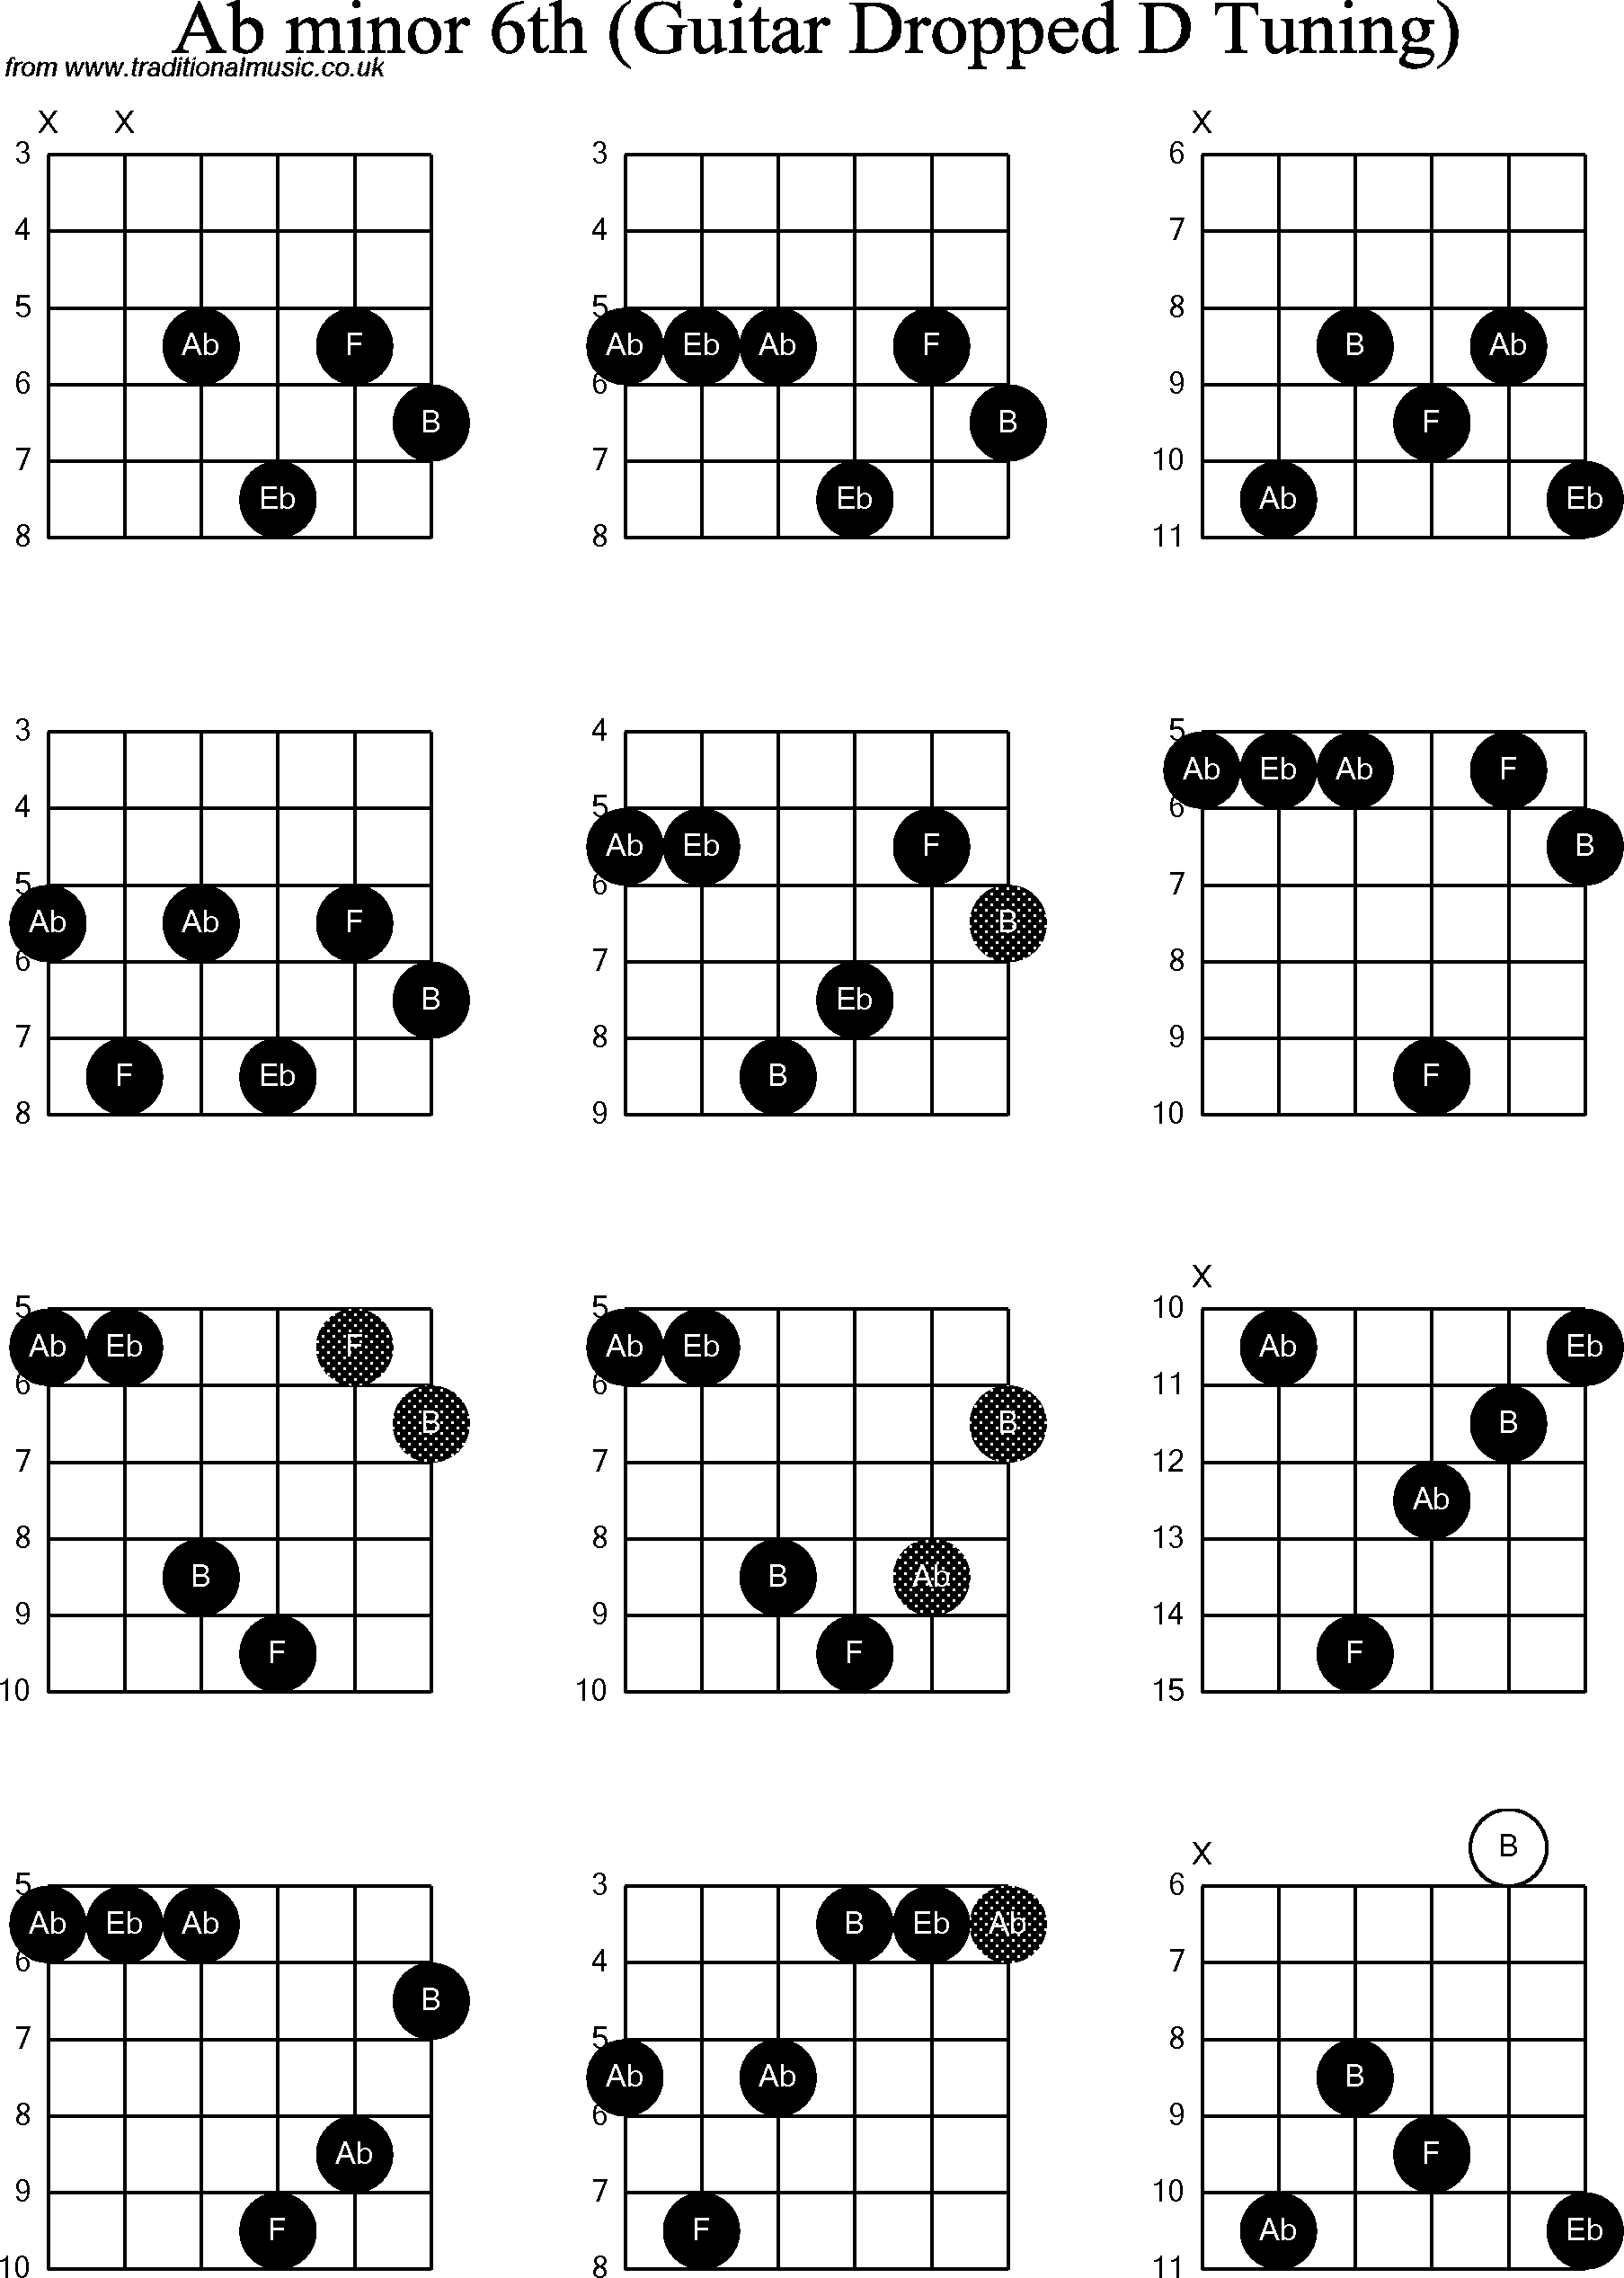 Chord diagrams for dropped D Guitar(DADGBE), Ab Minor6th